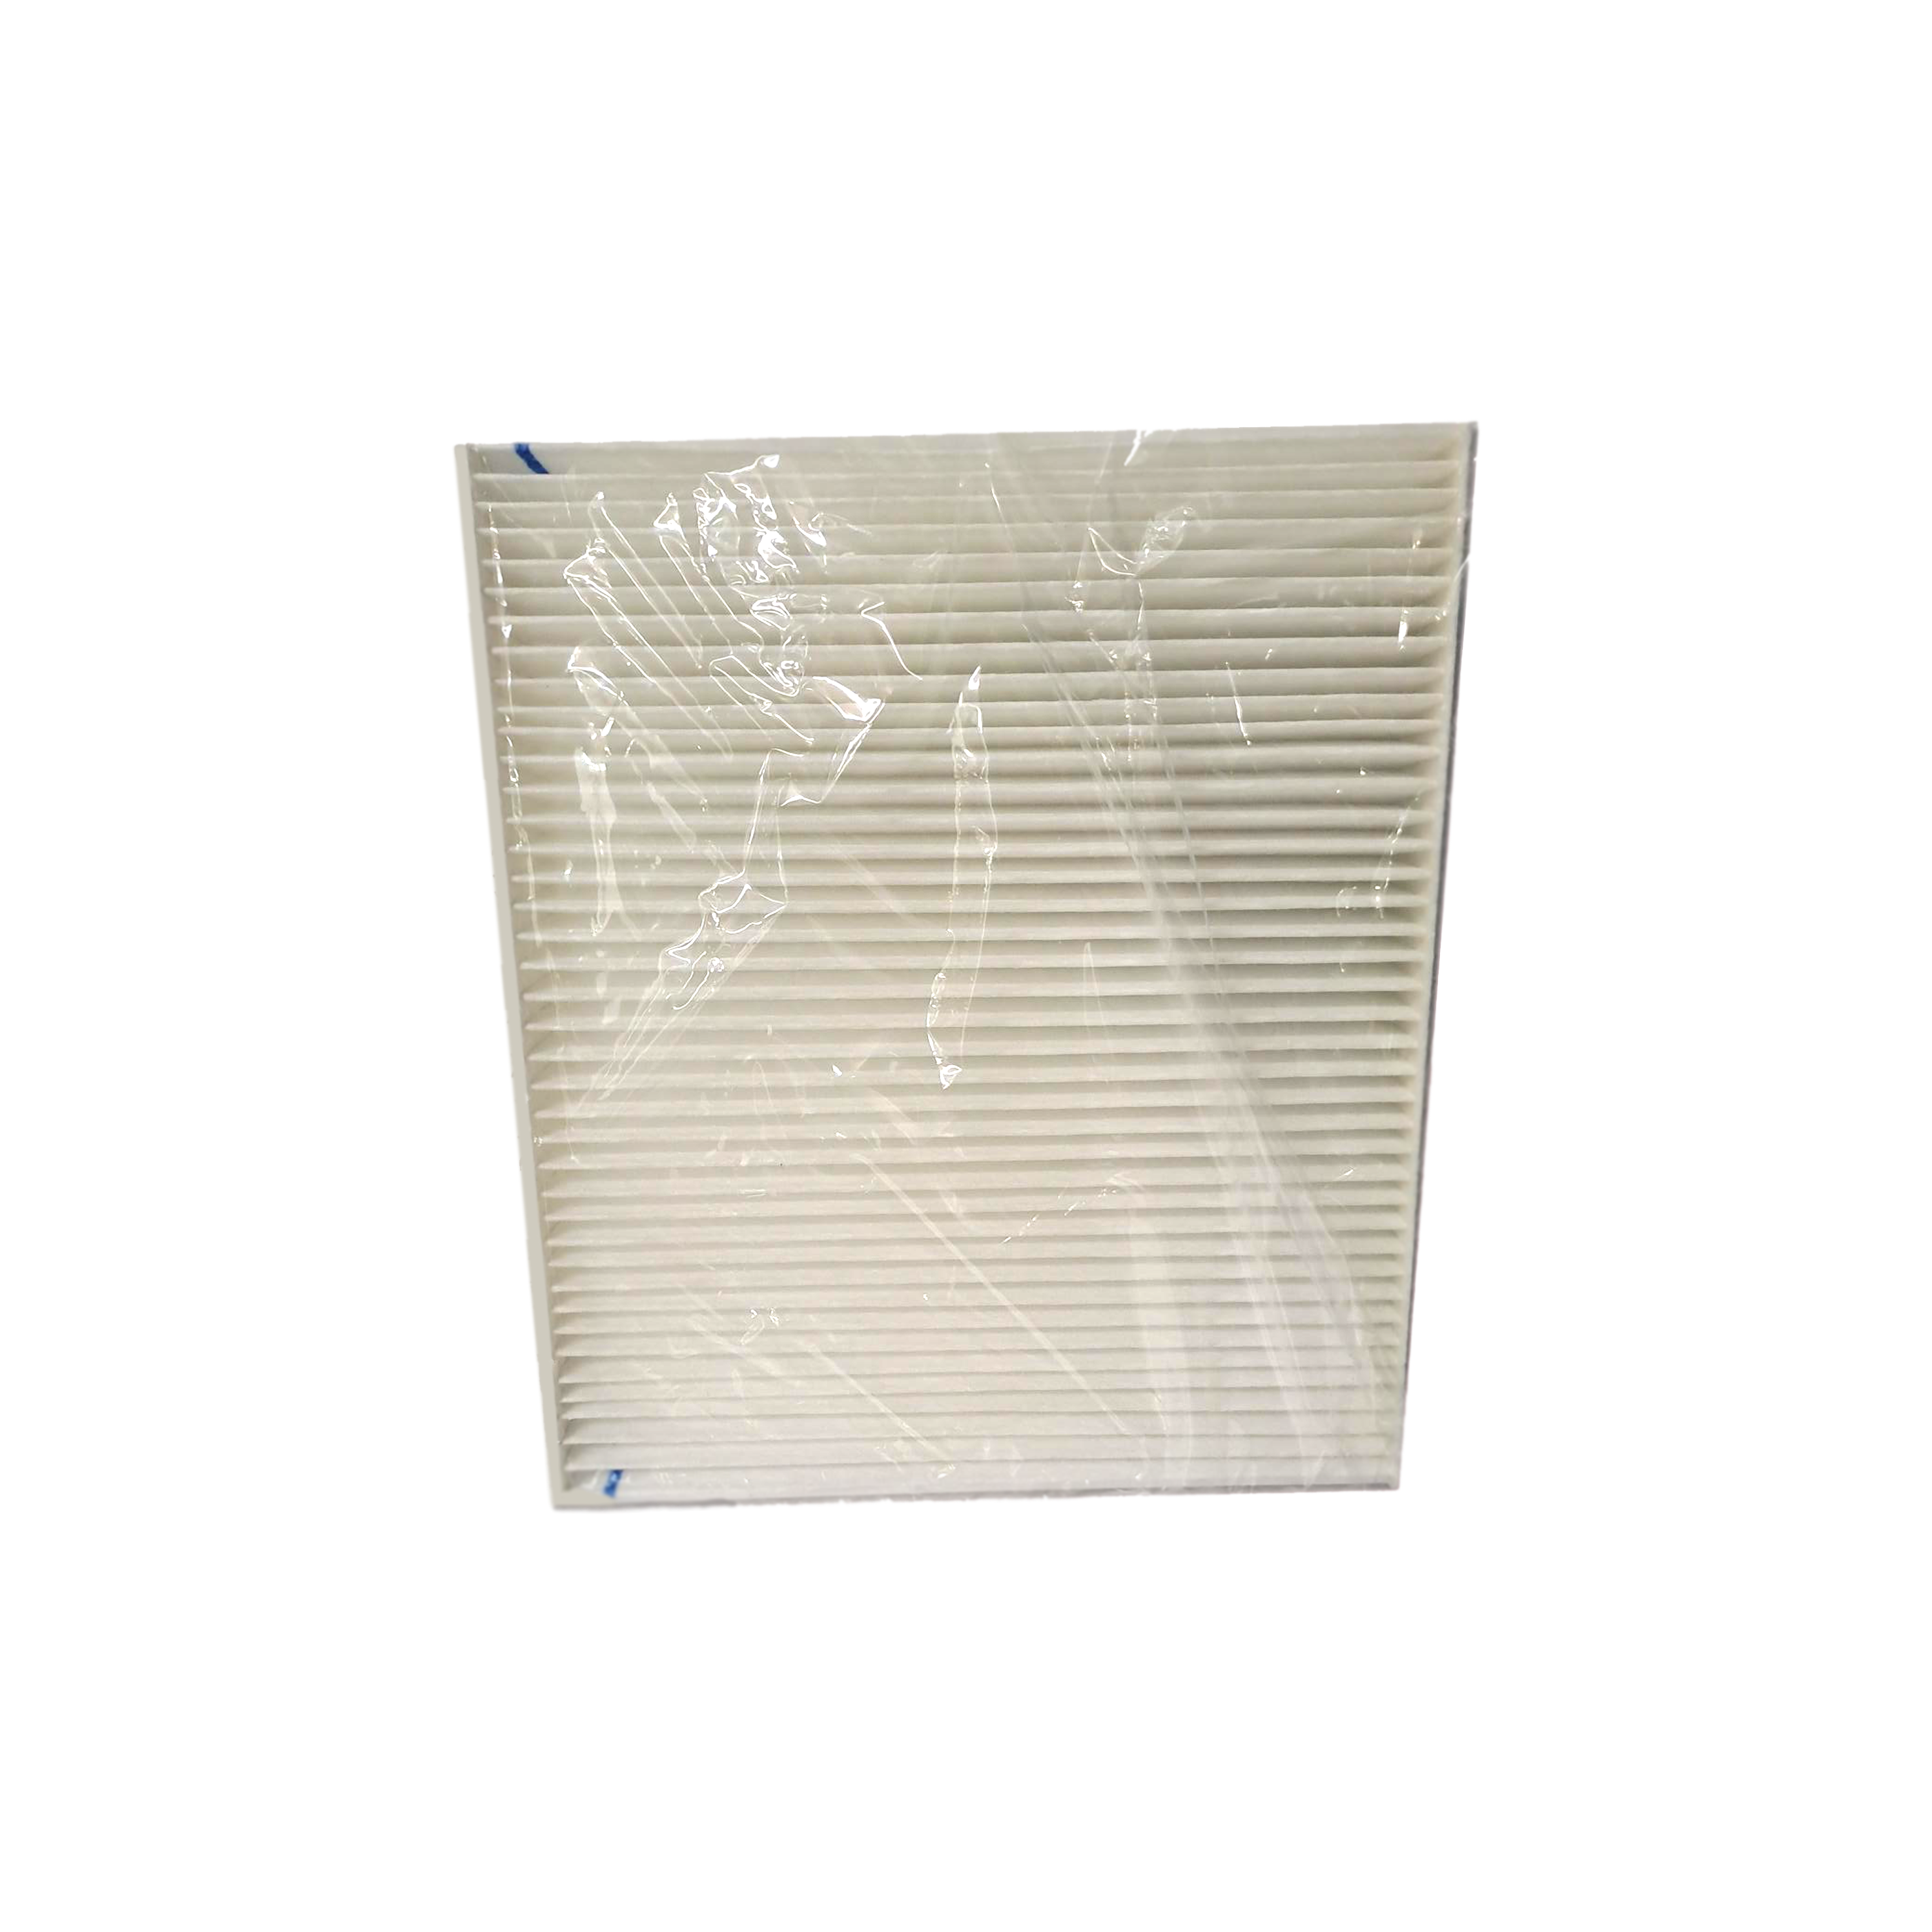 Air Conditioning Intake Filter for 140W / 160MH / 180MH / 200MH / 250MH / 270MH / 350MH